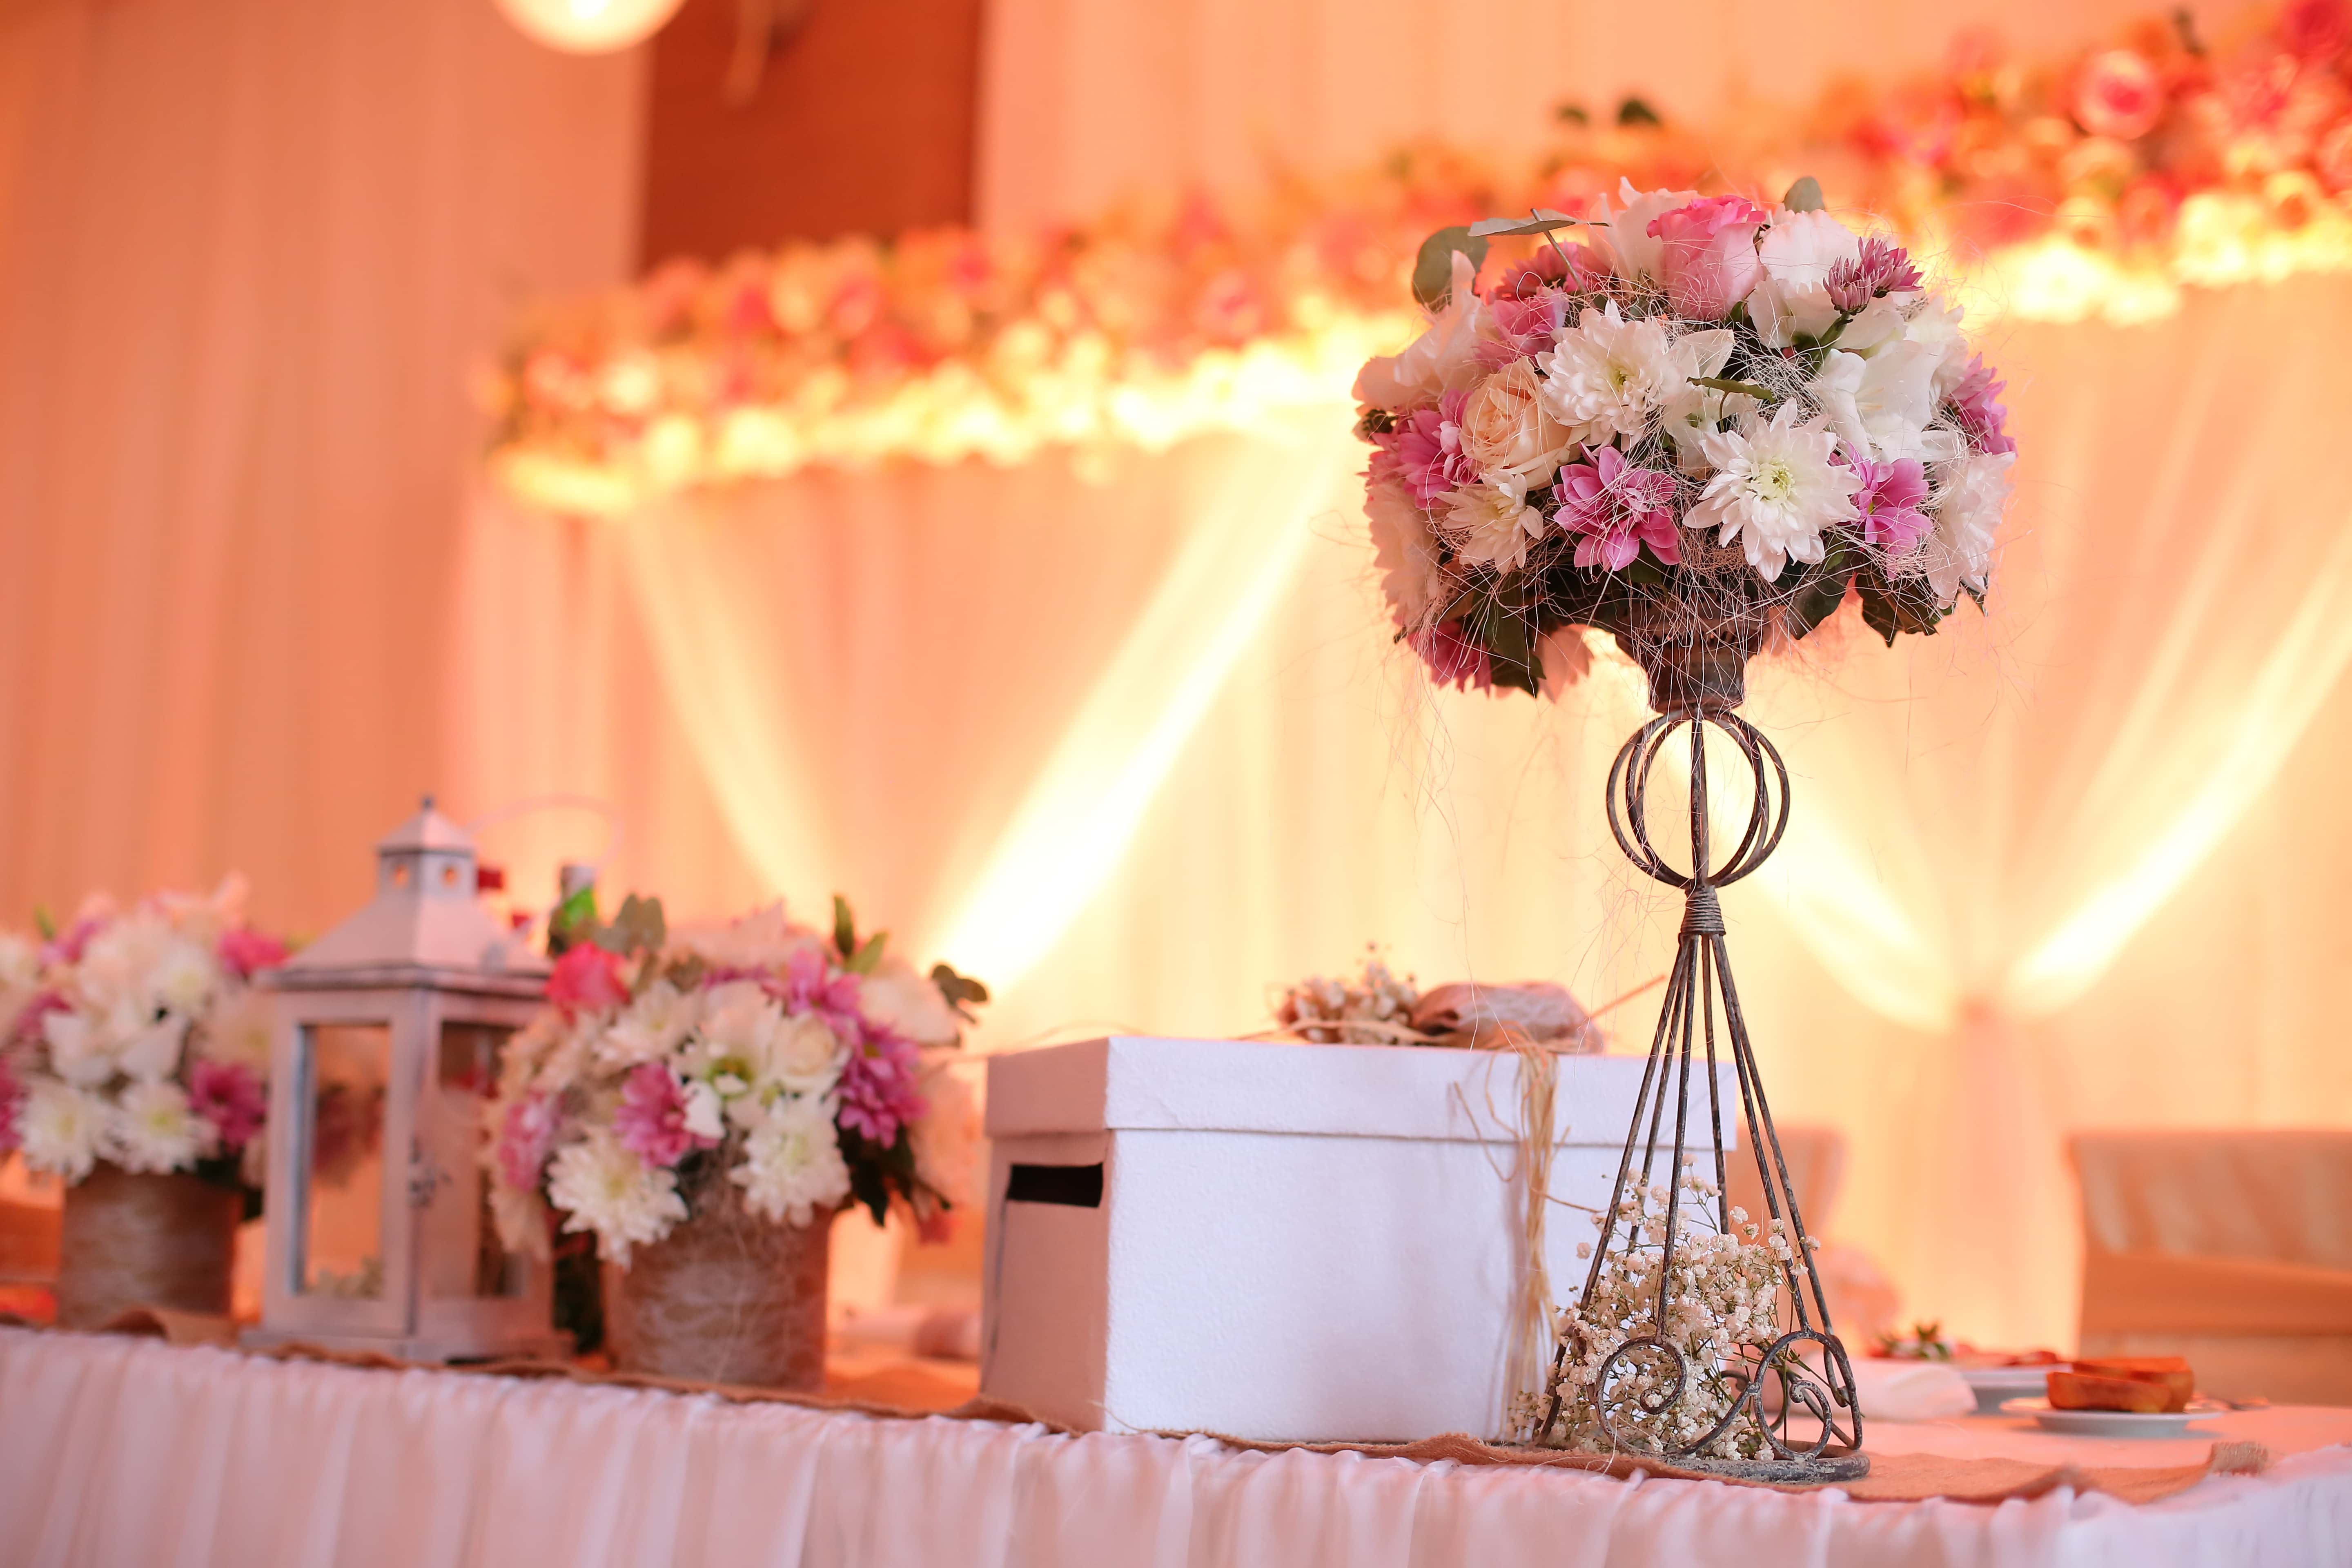 Luxury Bouquet Interior Design, How To Decorate Wedding Venue With Flowers